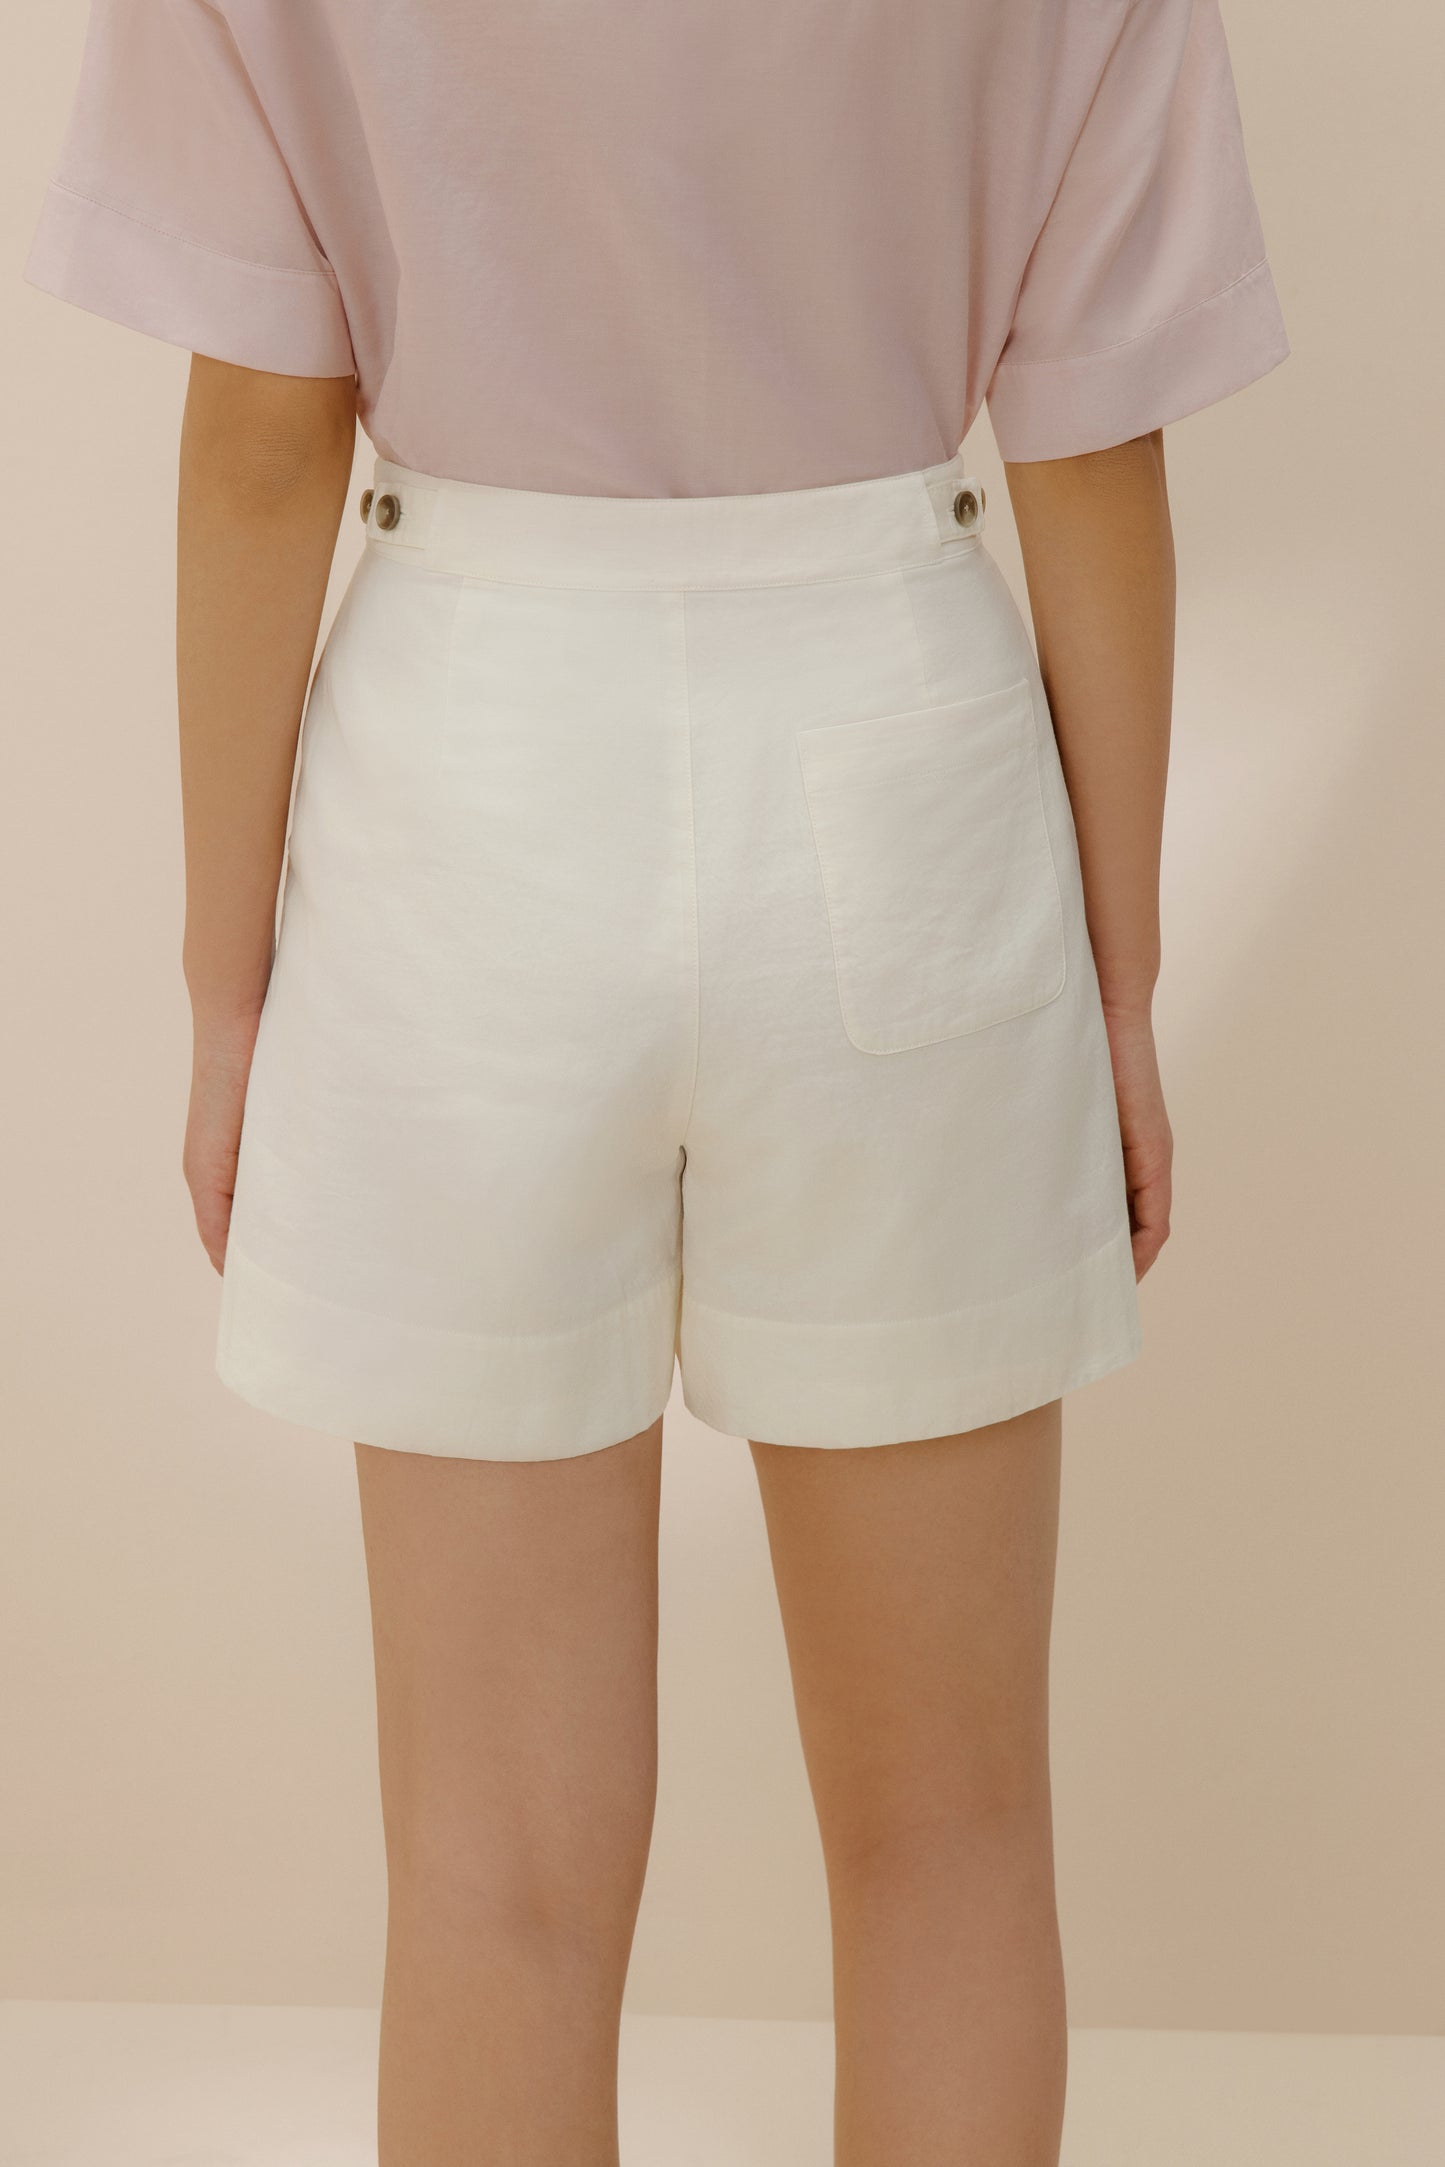 Hang Out Cotton Casual Shorts